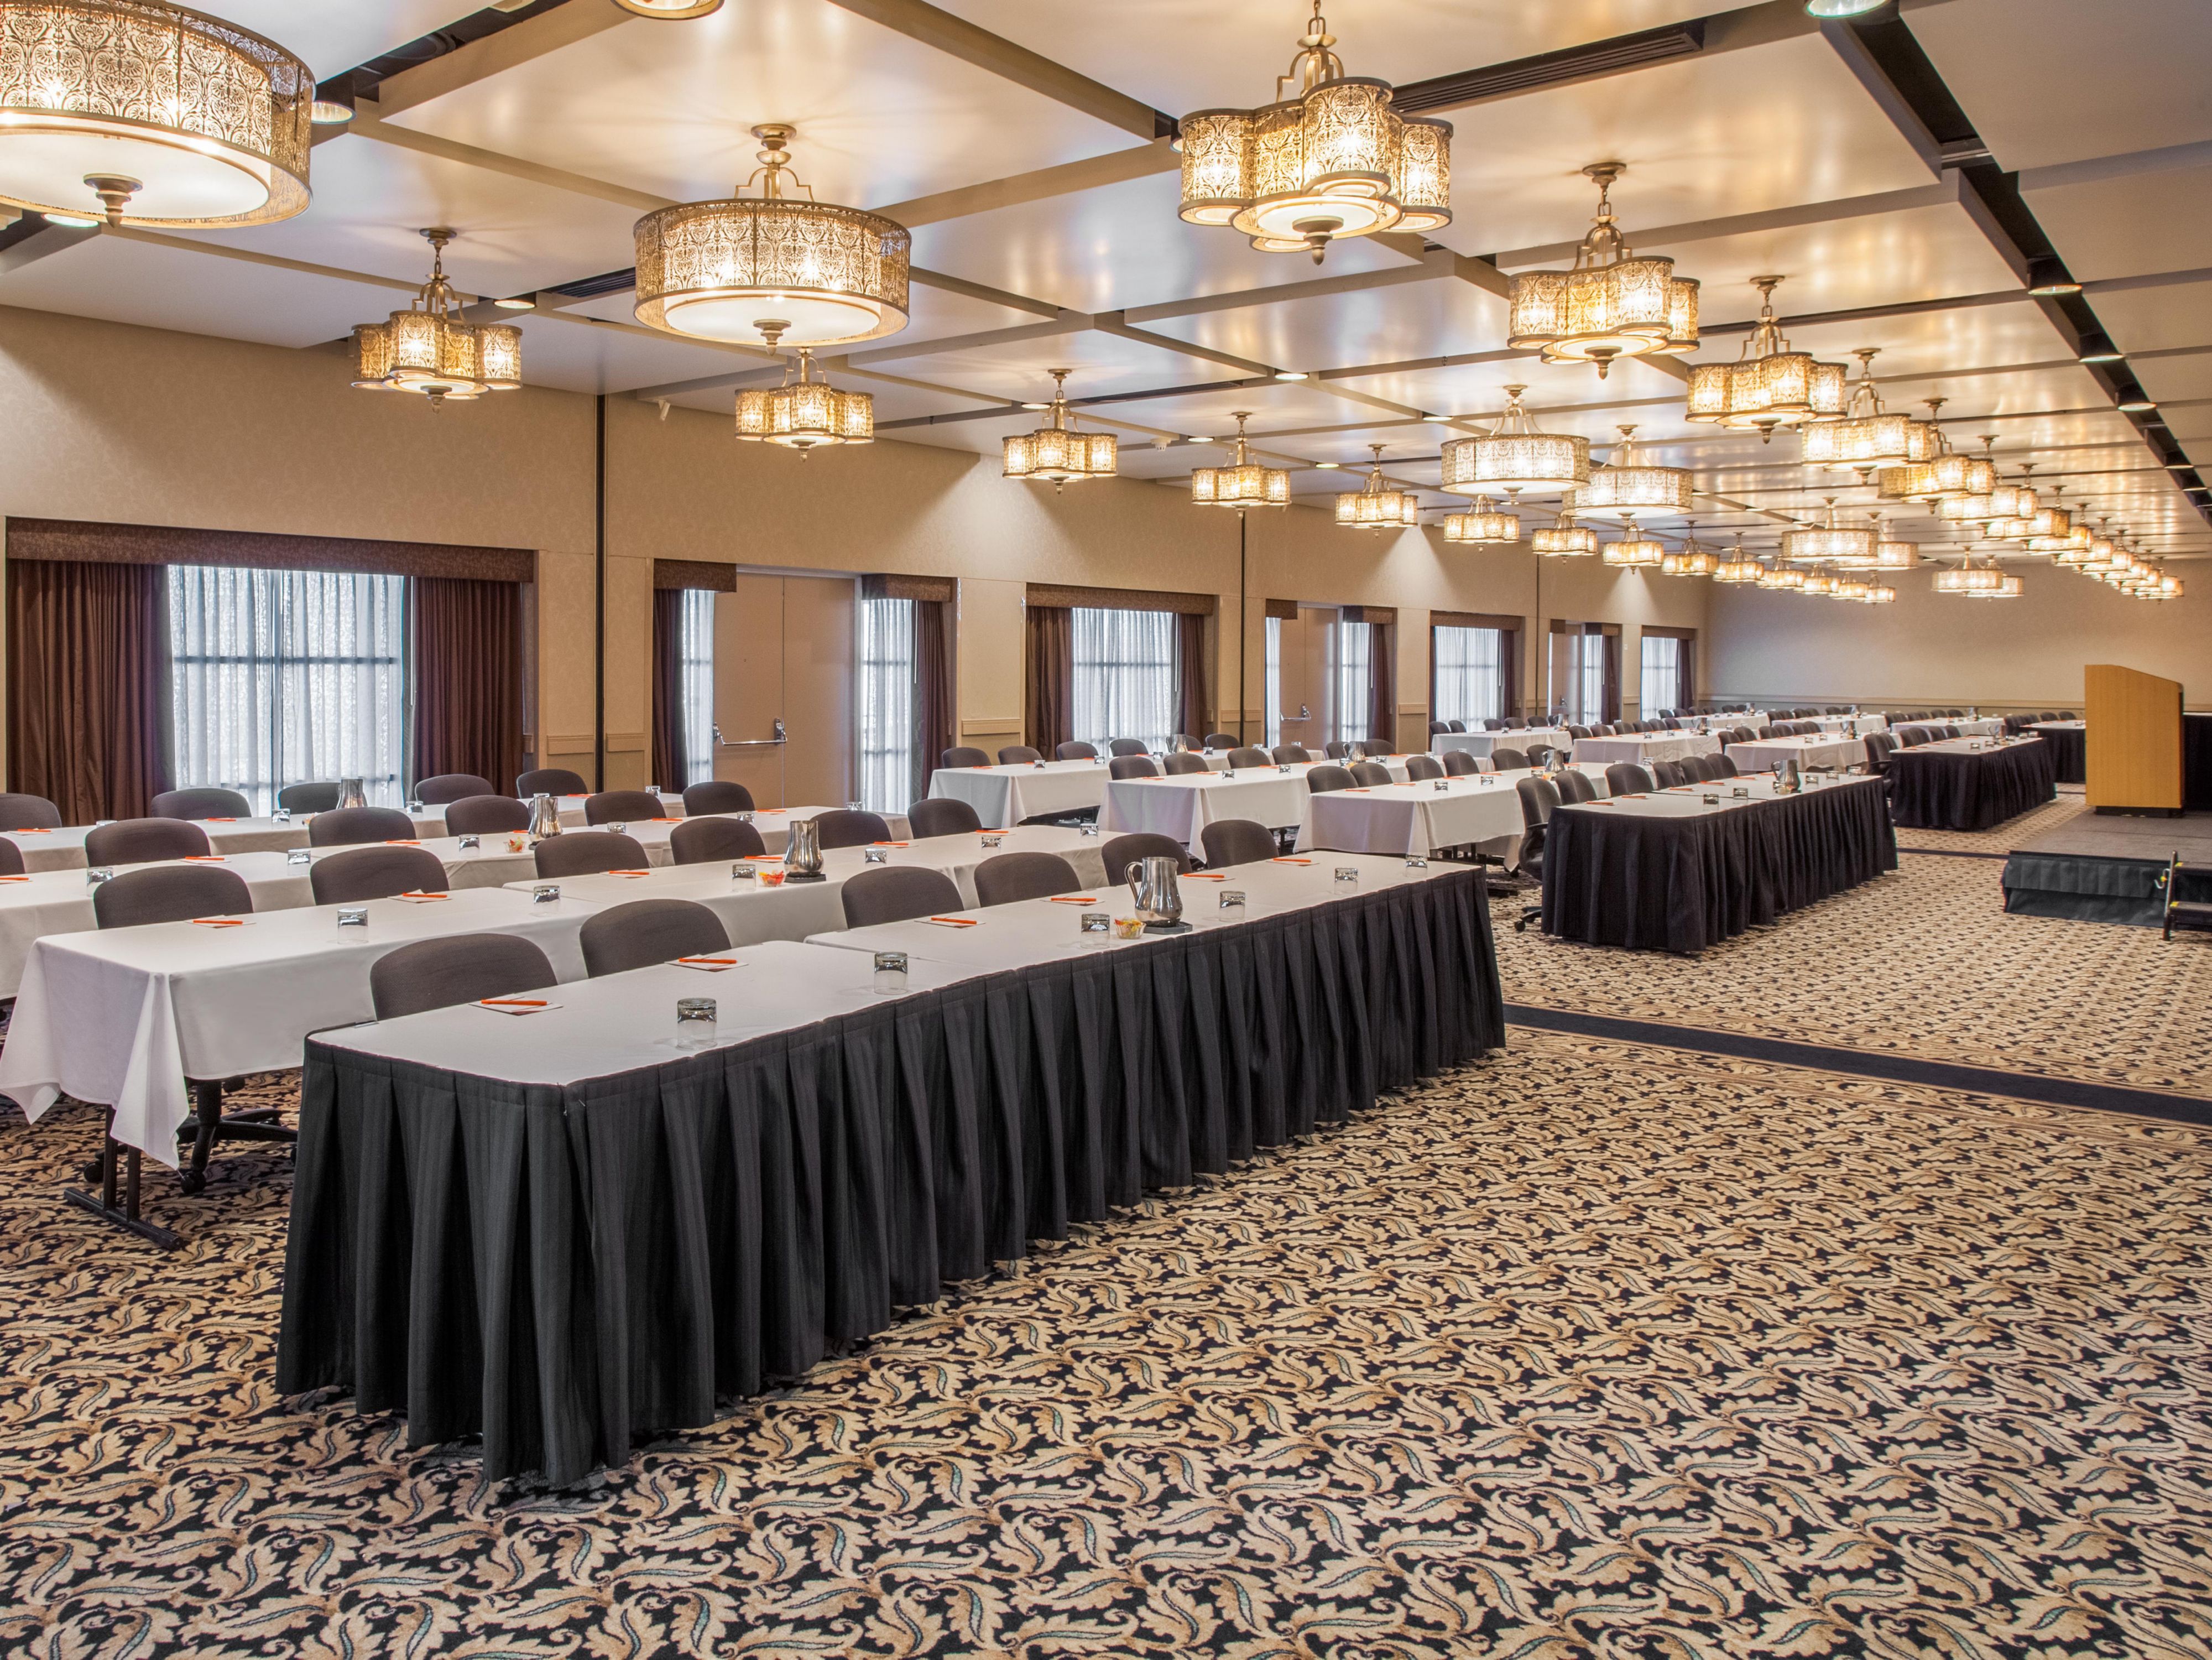 Host your corporate event, conference, wedding, or family gathering at our Minneapolis West hotel. We feature 38,193 sq ft of space with 35 venues, including elegant ballrooms bathed in natural light and boardrooms for up to 450 guests. With state-of-the-art equipment, catering services, and expert event planning we ensure your event is a success.